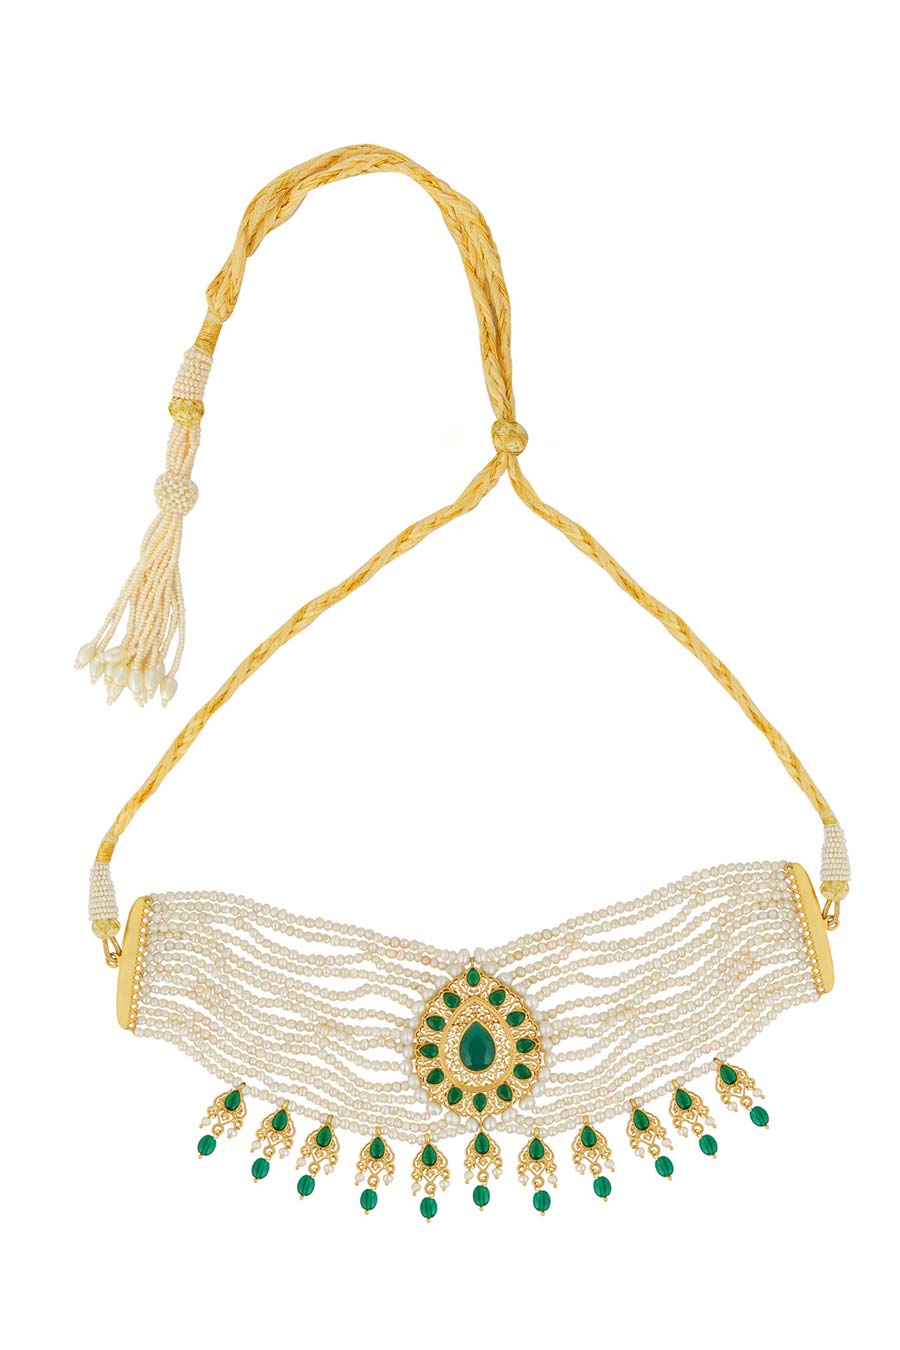 Sultana Gold Plated Necklace